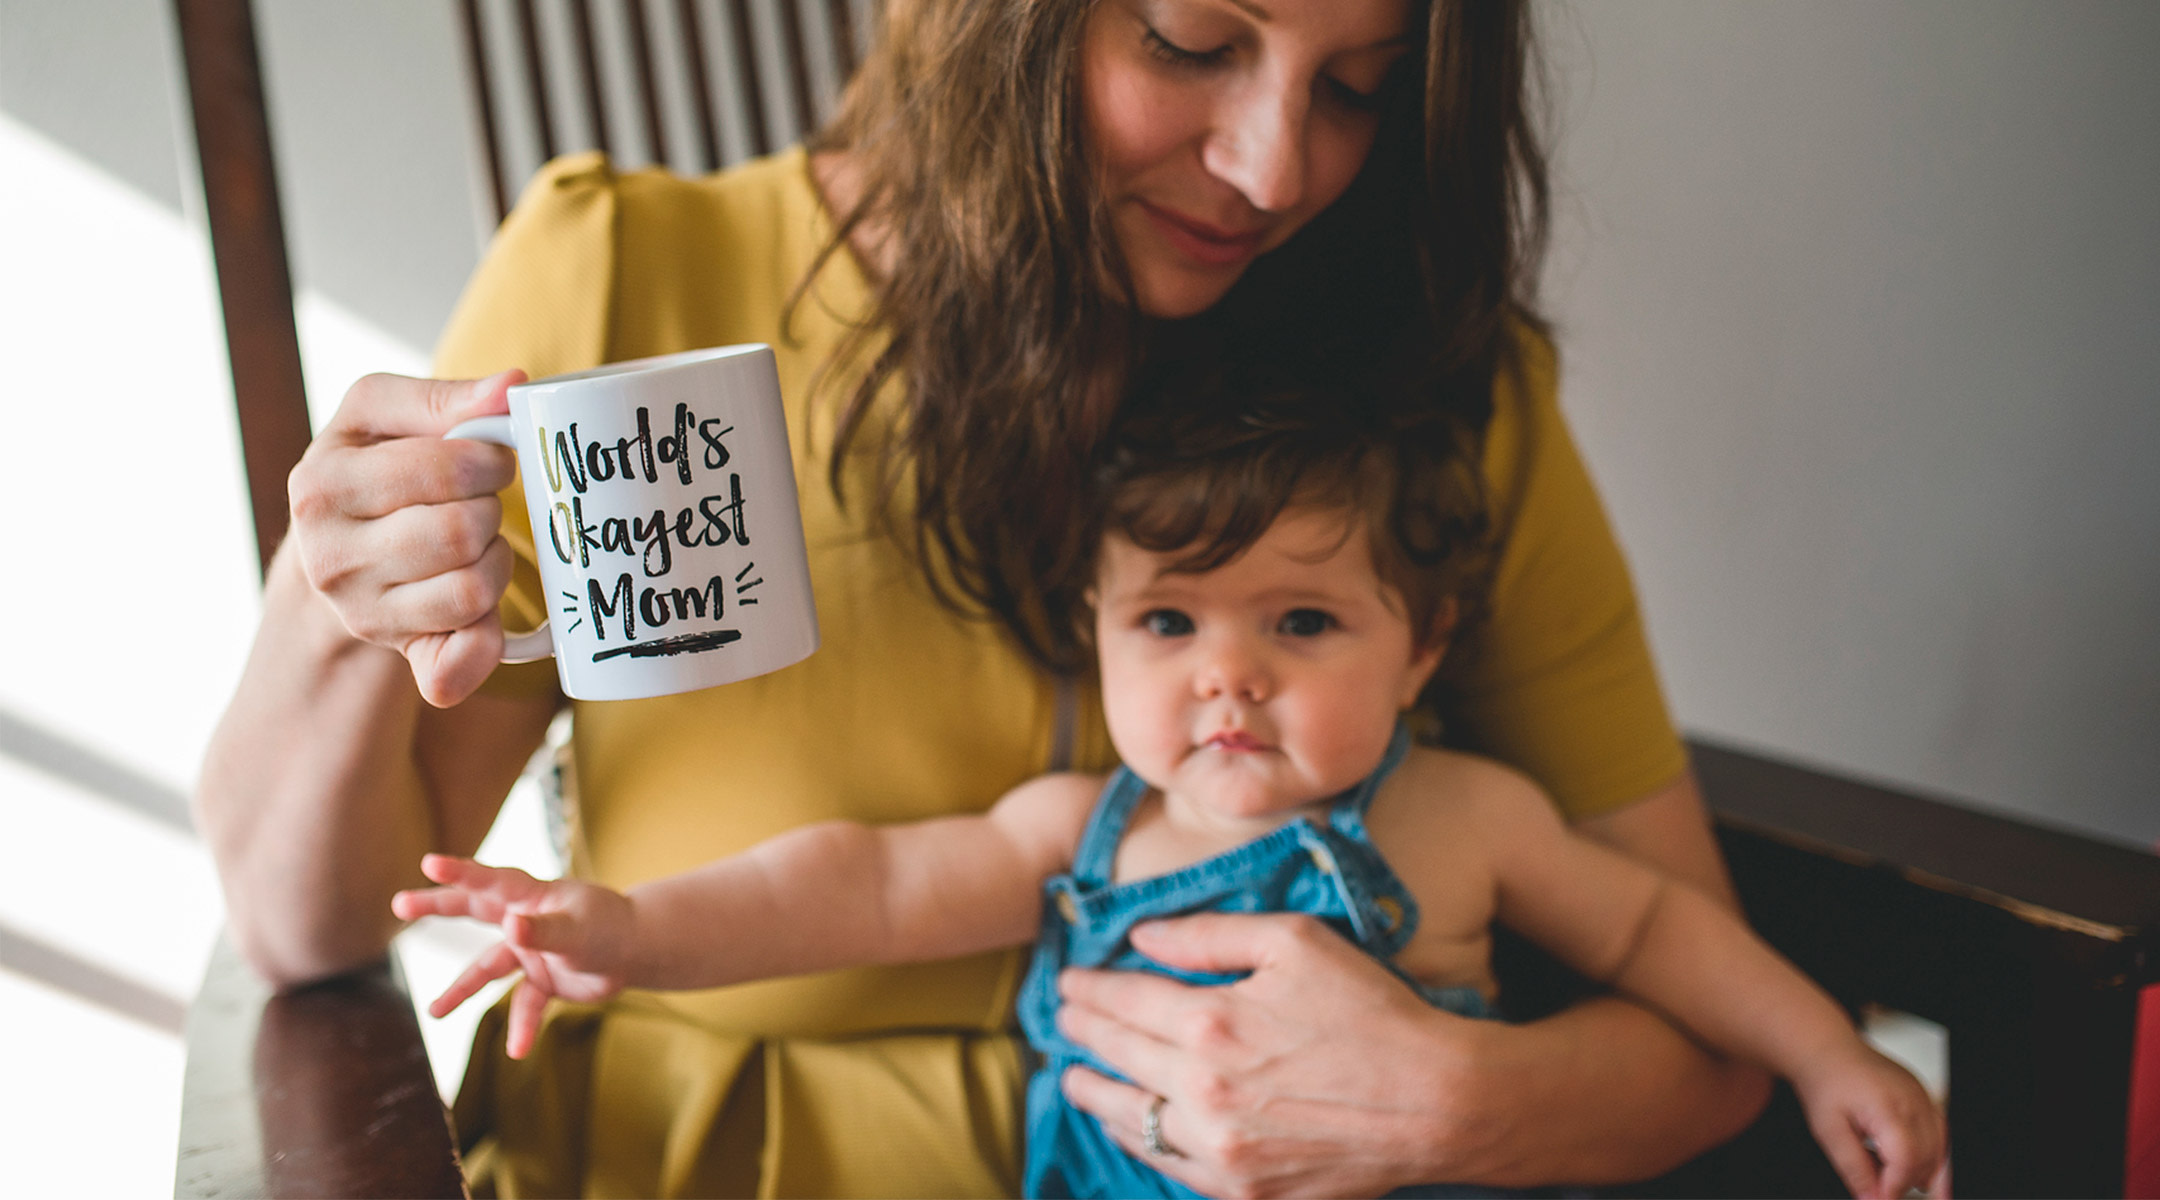 mom holding baby with mug that says, "world's okayest mom" speaking to the idea of mom shaming